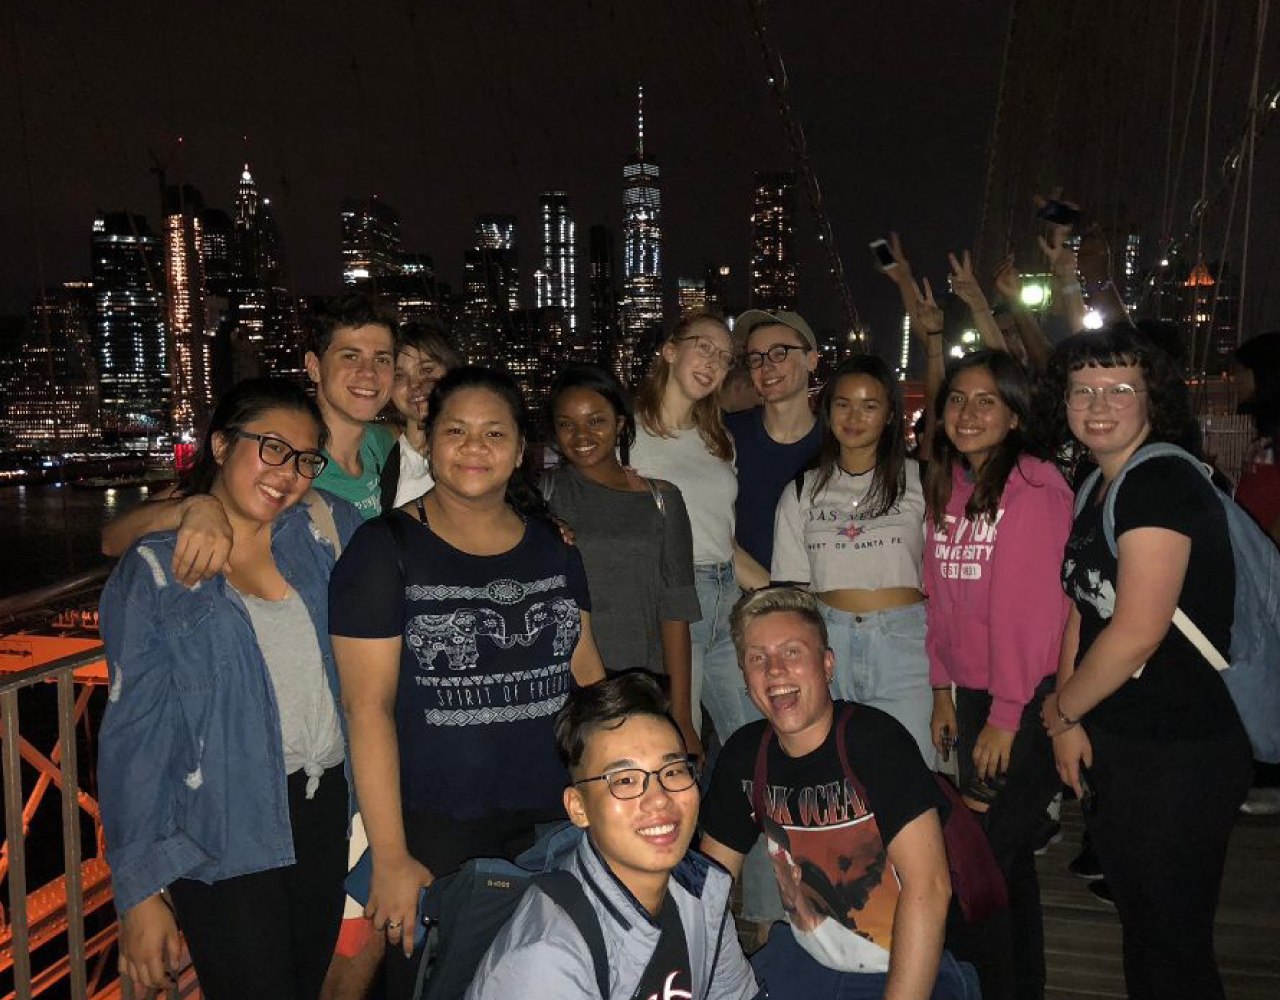 Garet and friends smiling for a photo on a bridge in NYC